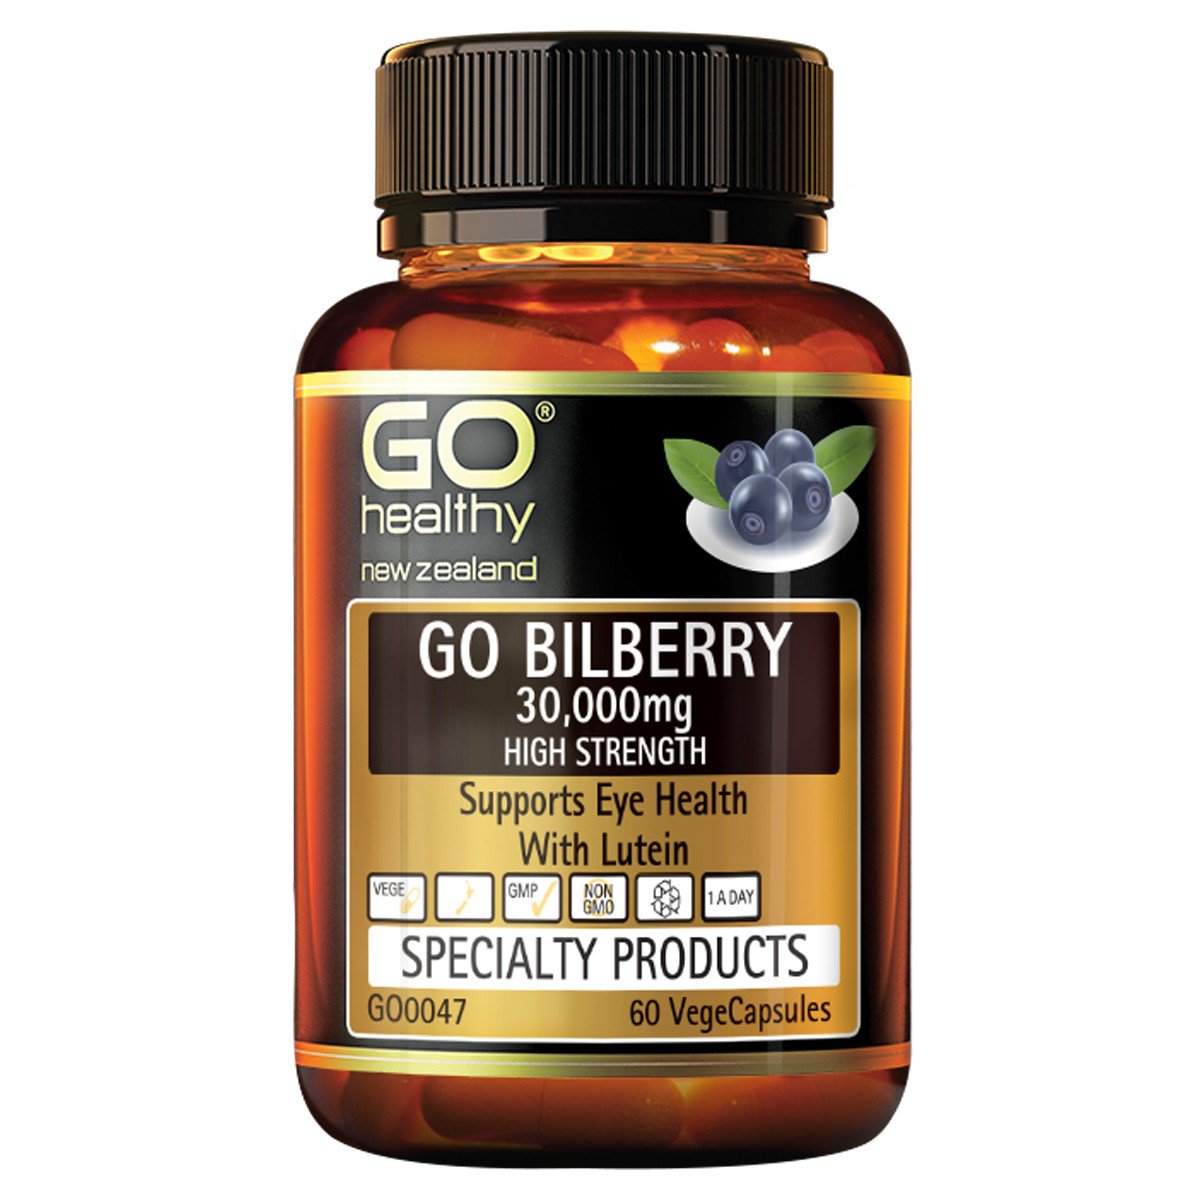 GO Healthy Bilberry 30,000mg 60 Capsules